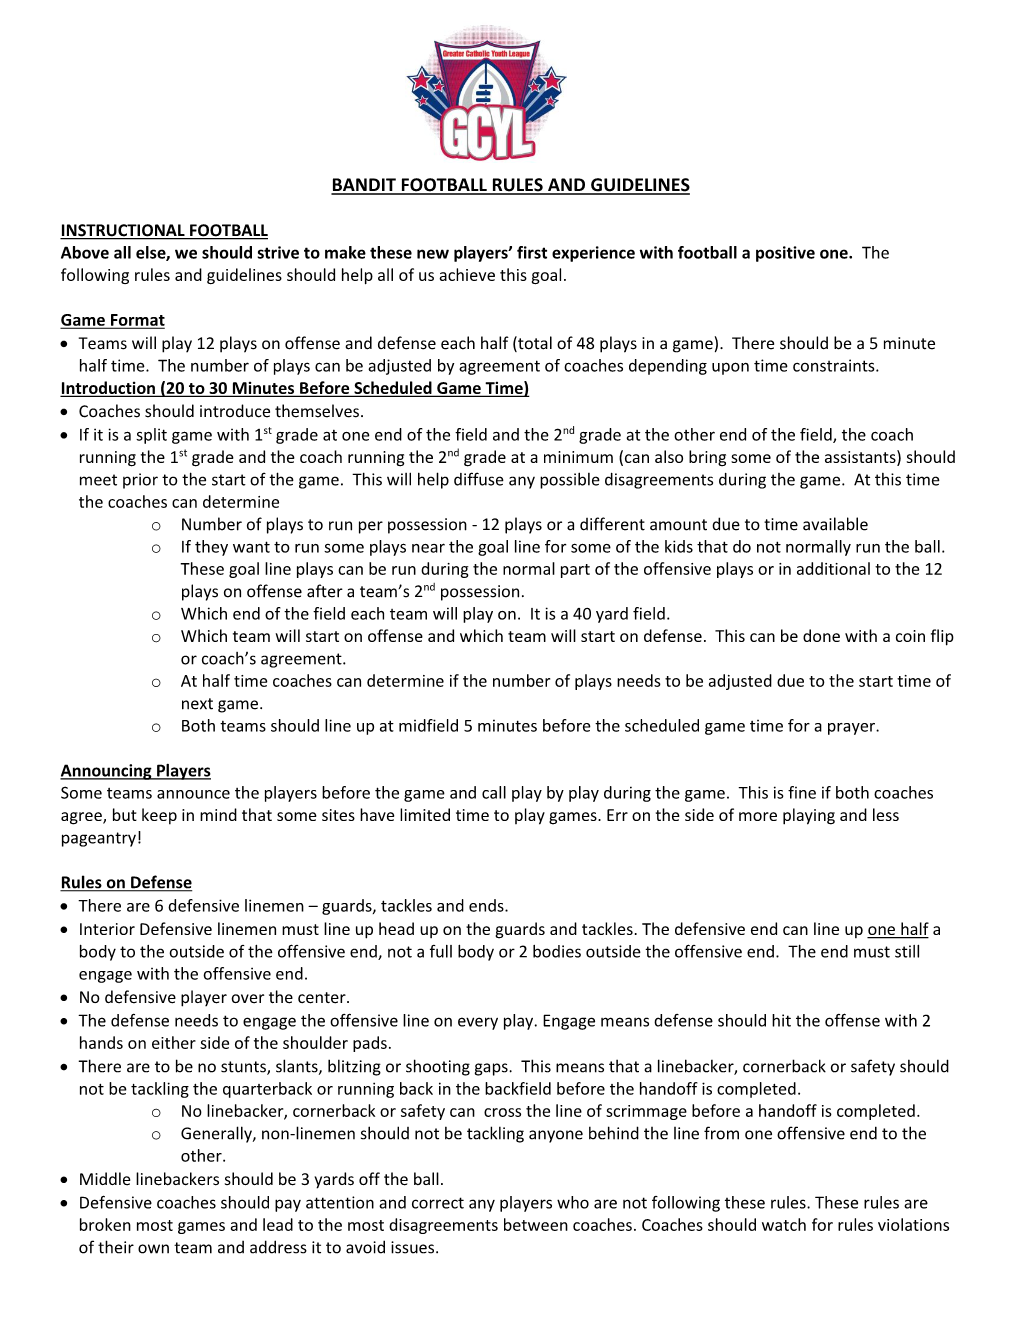 Bandit Football Rules and Guidelines